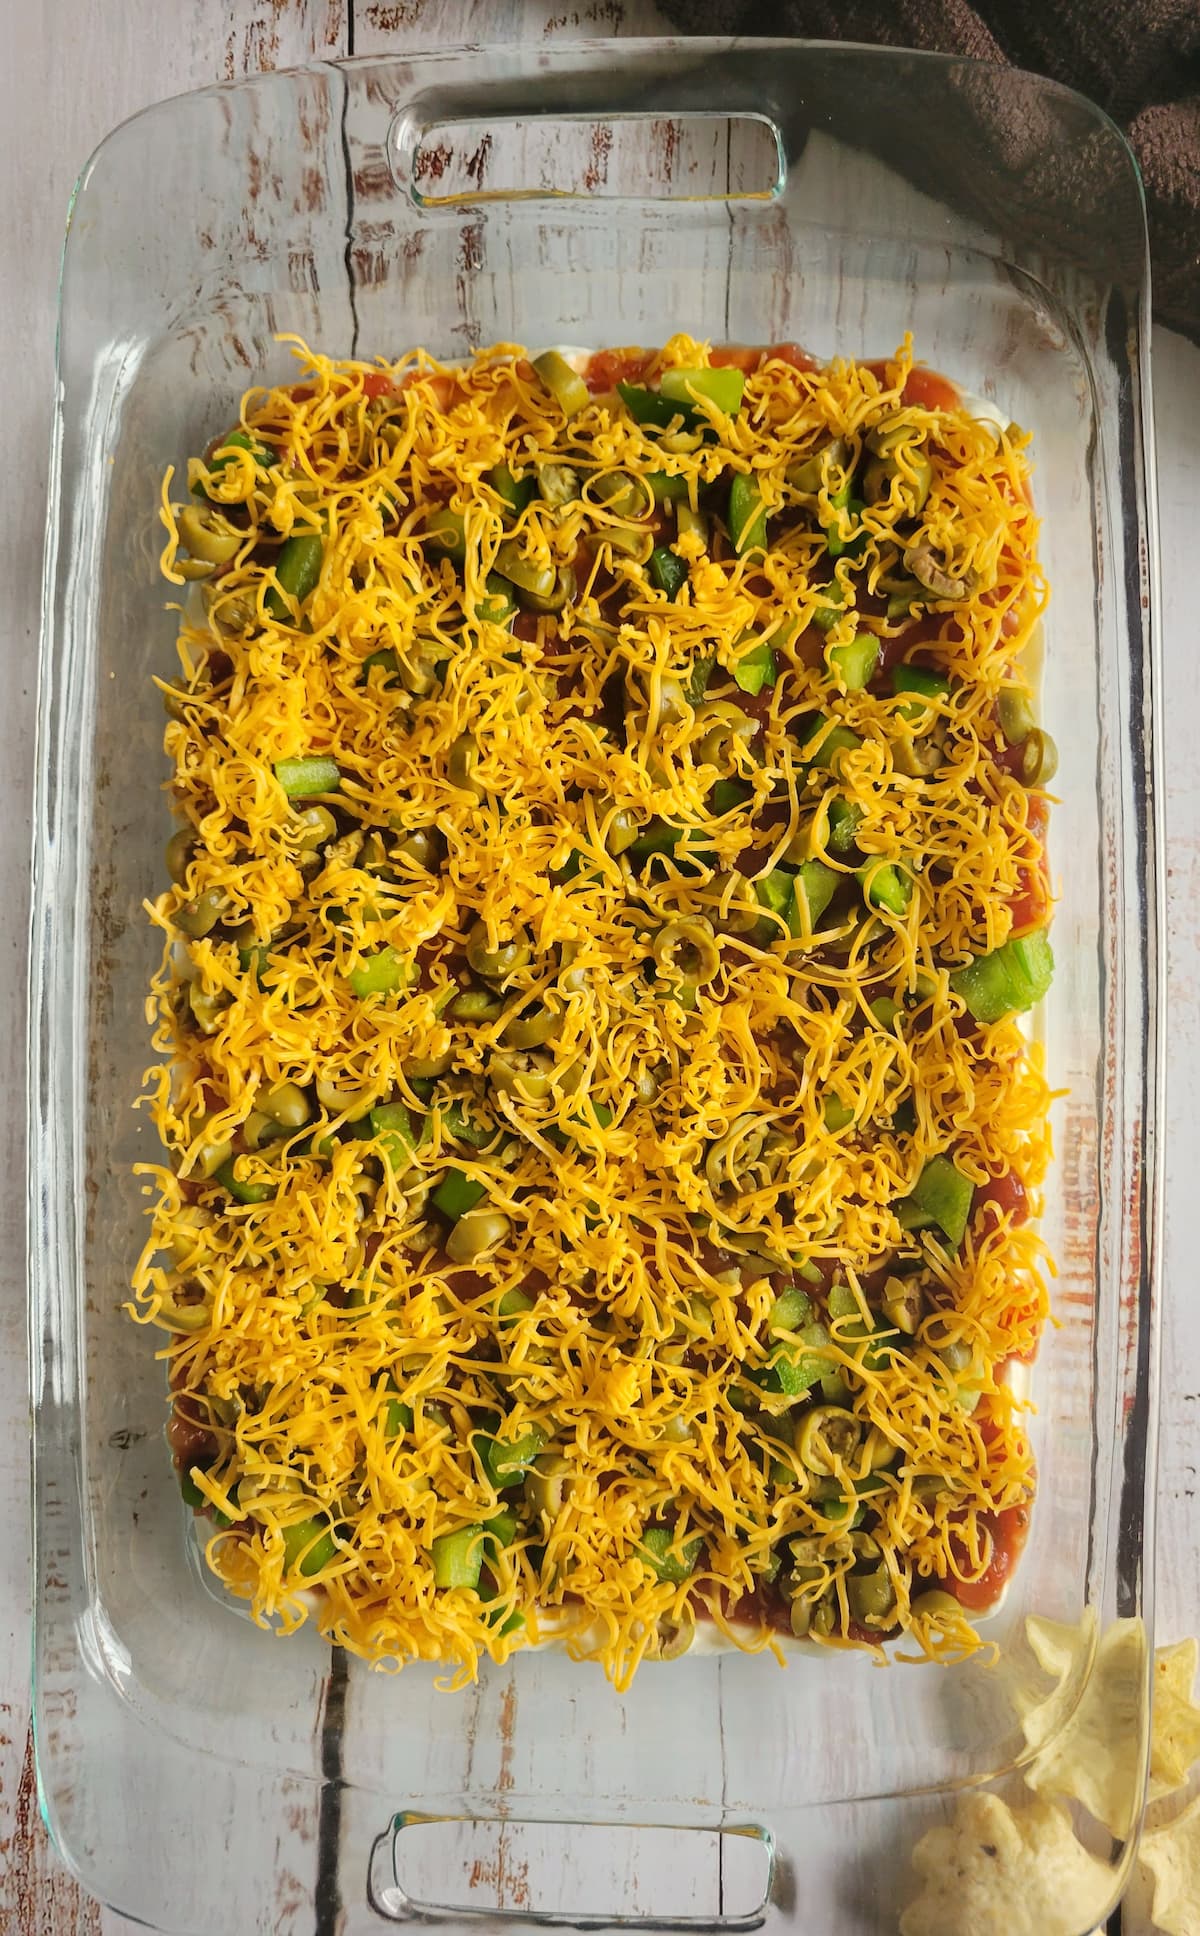 nacho dip topped with shredded cheddar cheese layered in a rectangular baking dish